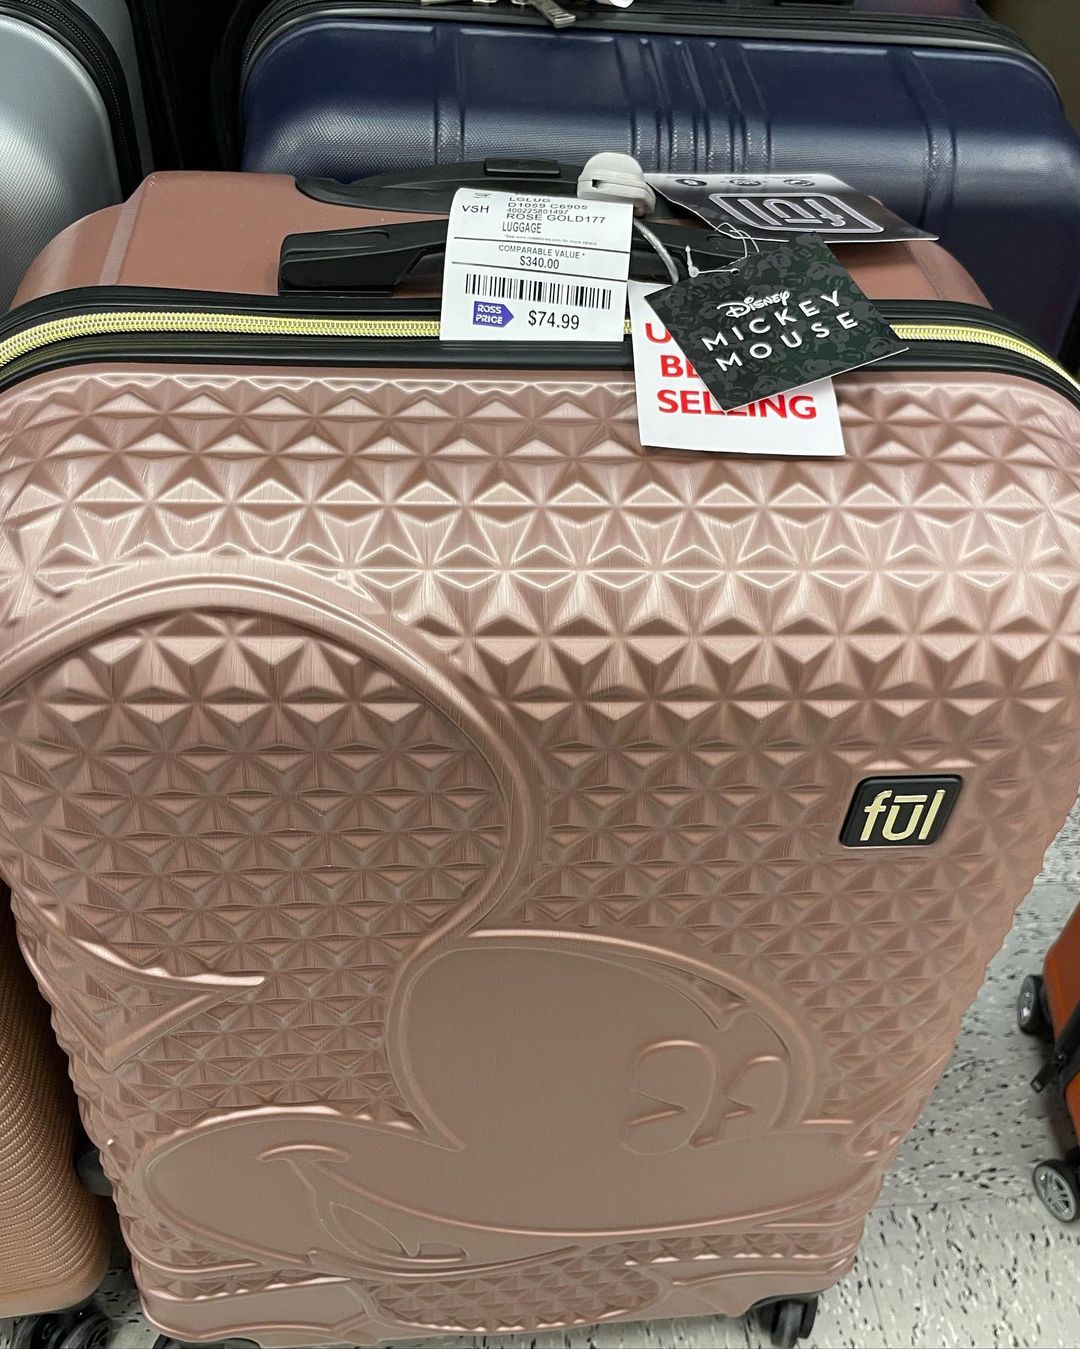 Suitcase at Ross Dress For Less - Ross Orlando